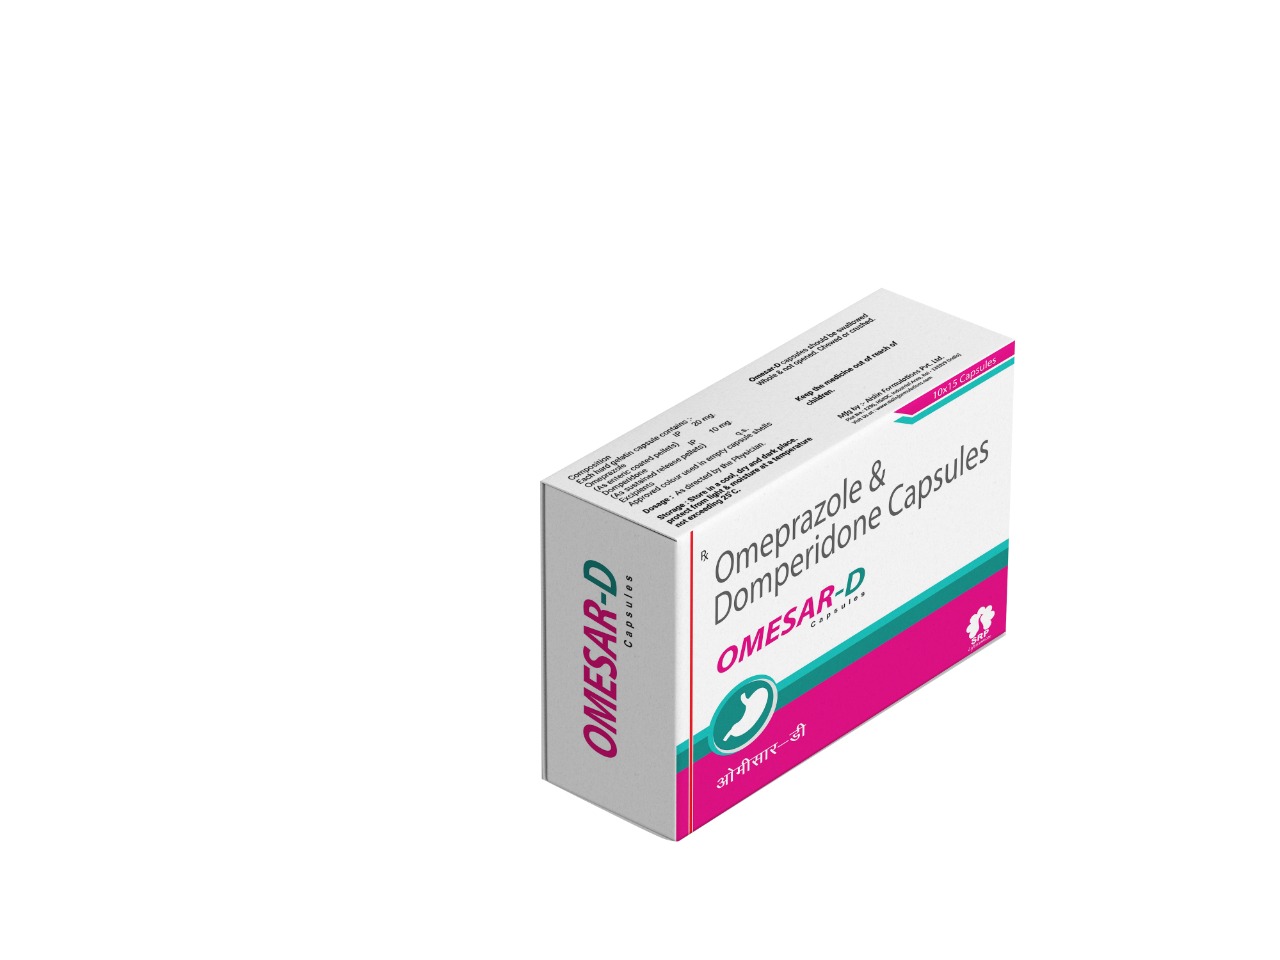 Product Name: OMESAR D, Compositions of are Omeprazole and domperidone capsules - Cynak Healthcare